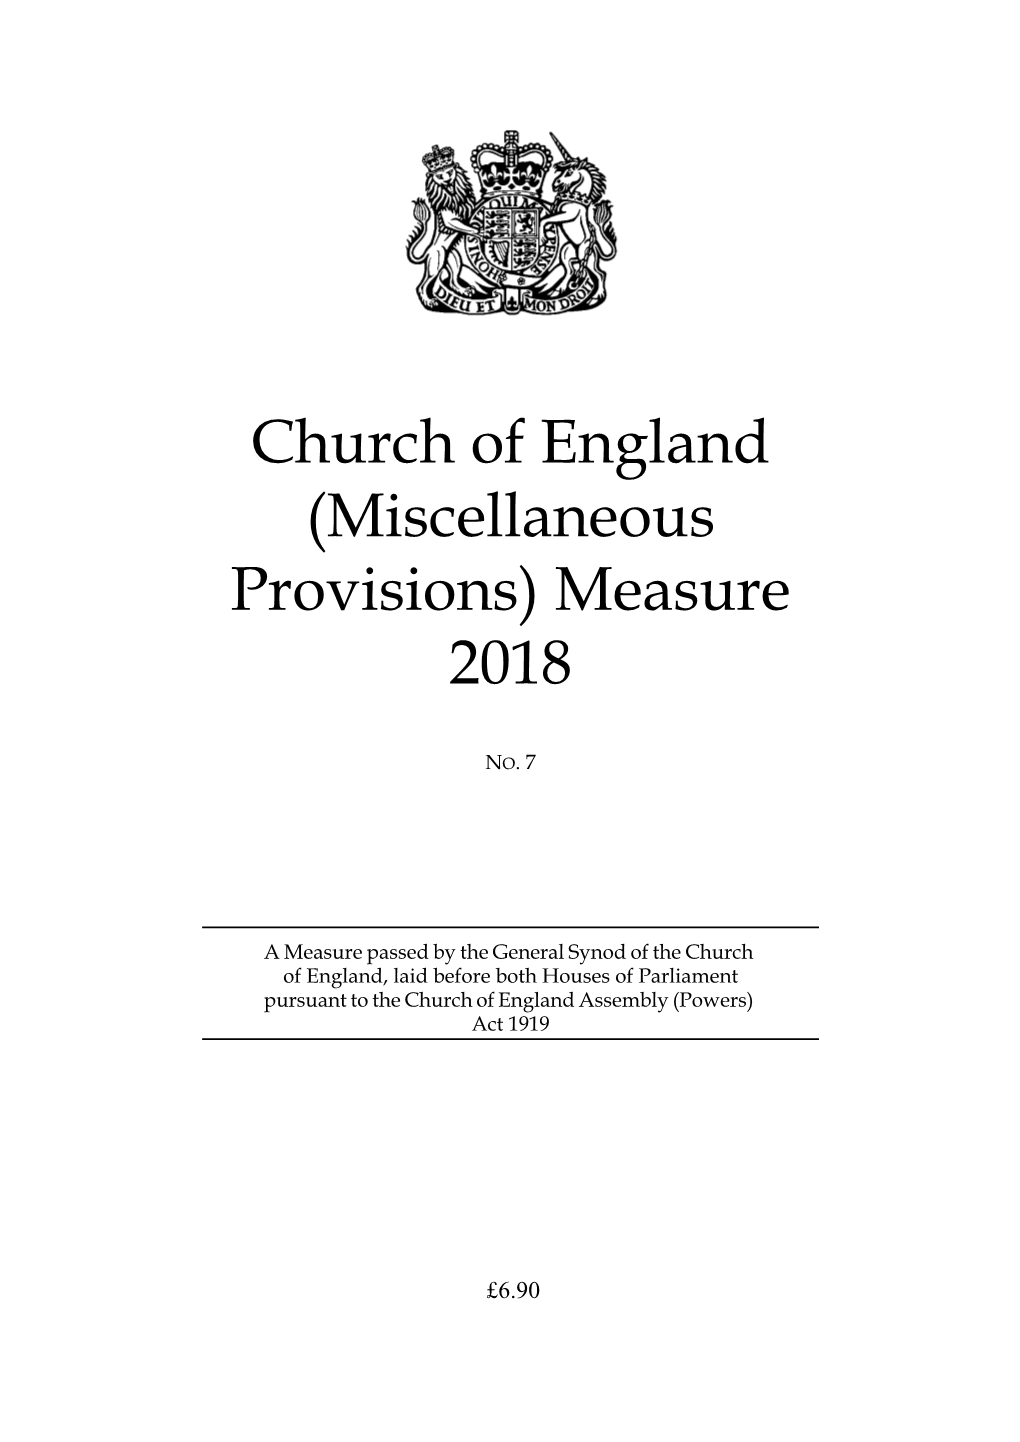 Church of England (Miscellaneous Provisions) Measure 2018